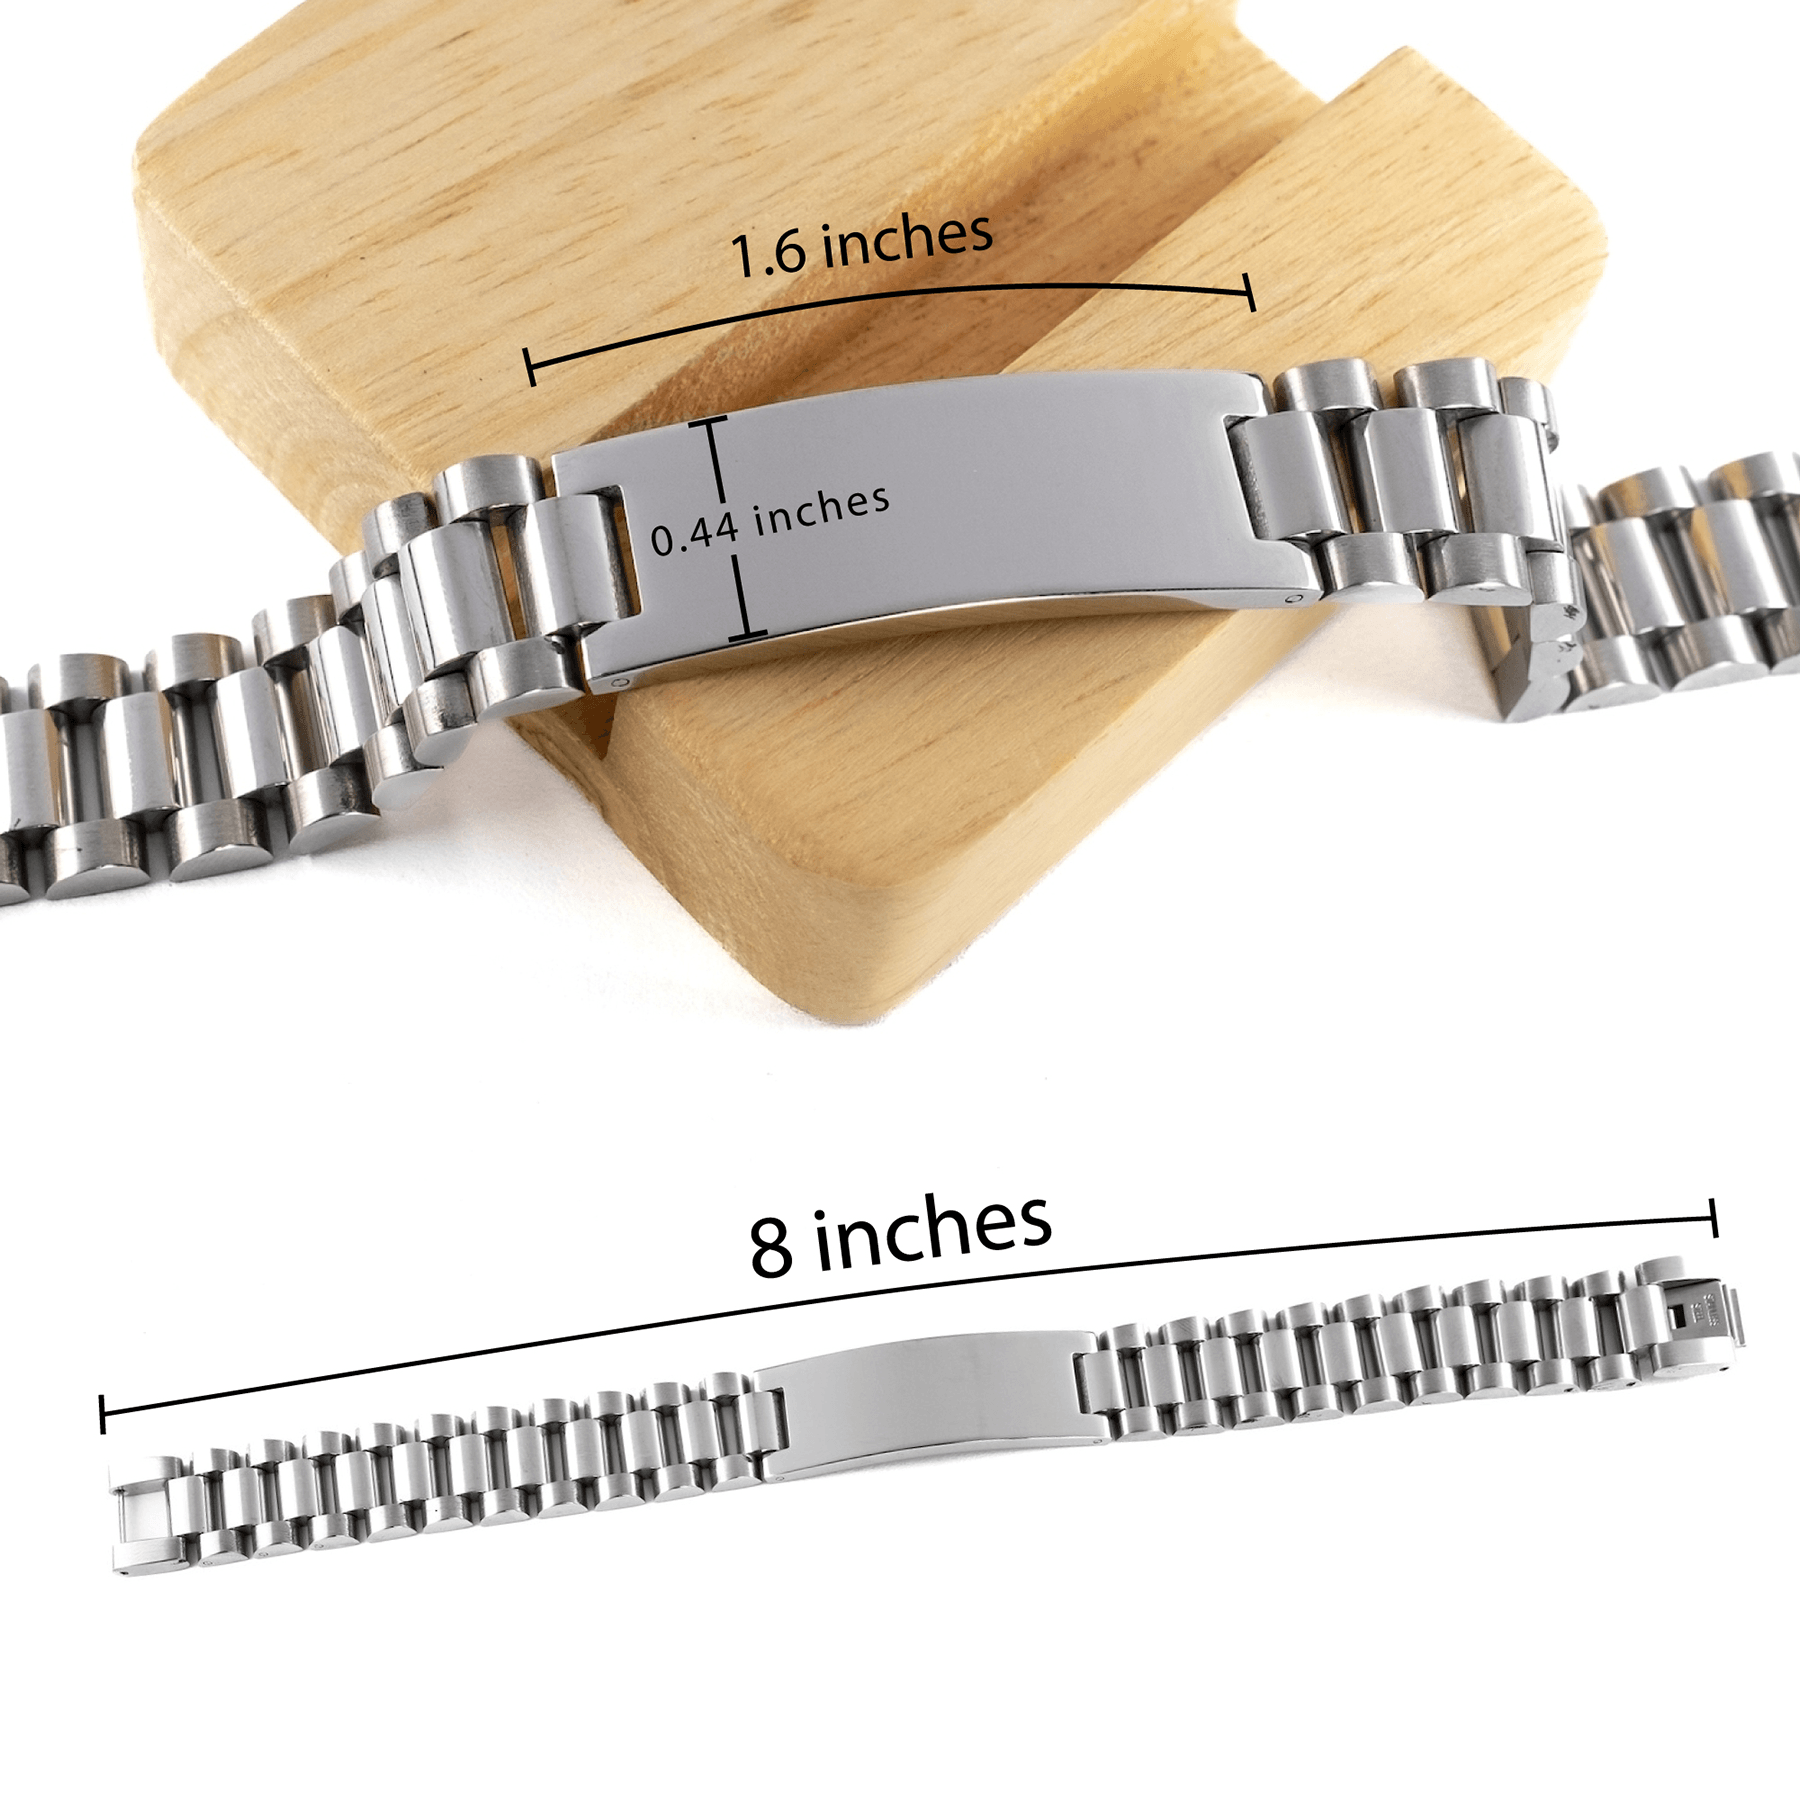 Remarkable Obstetrician Gifts, Your dedication and hard work, Inspirational Birthday Christmas Unique Ladder Stainless Steel Bracelet For Obstetrician, Coworkers, Men, Women, Friends - Mallard Moon Gift Shop